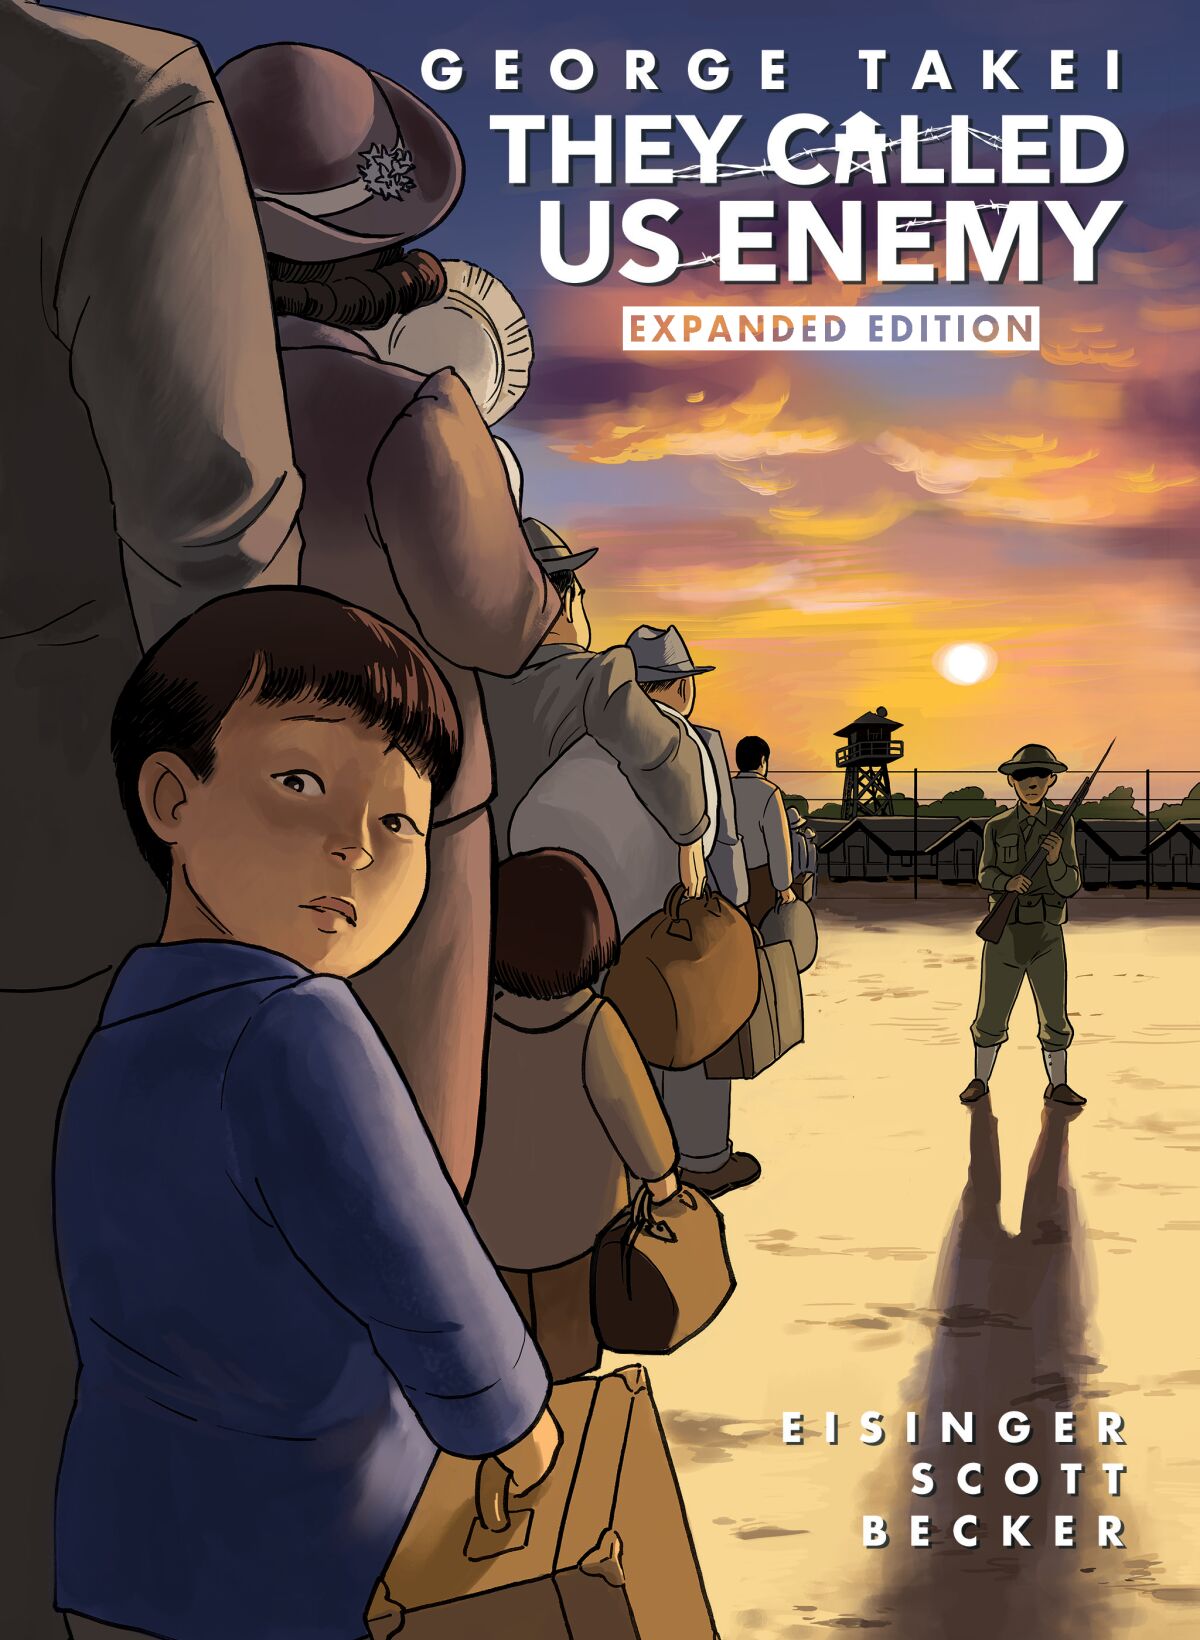 Book jacket for "They Called Us Enemy" by George Takei